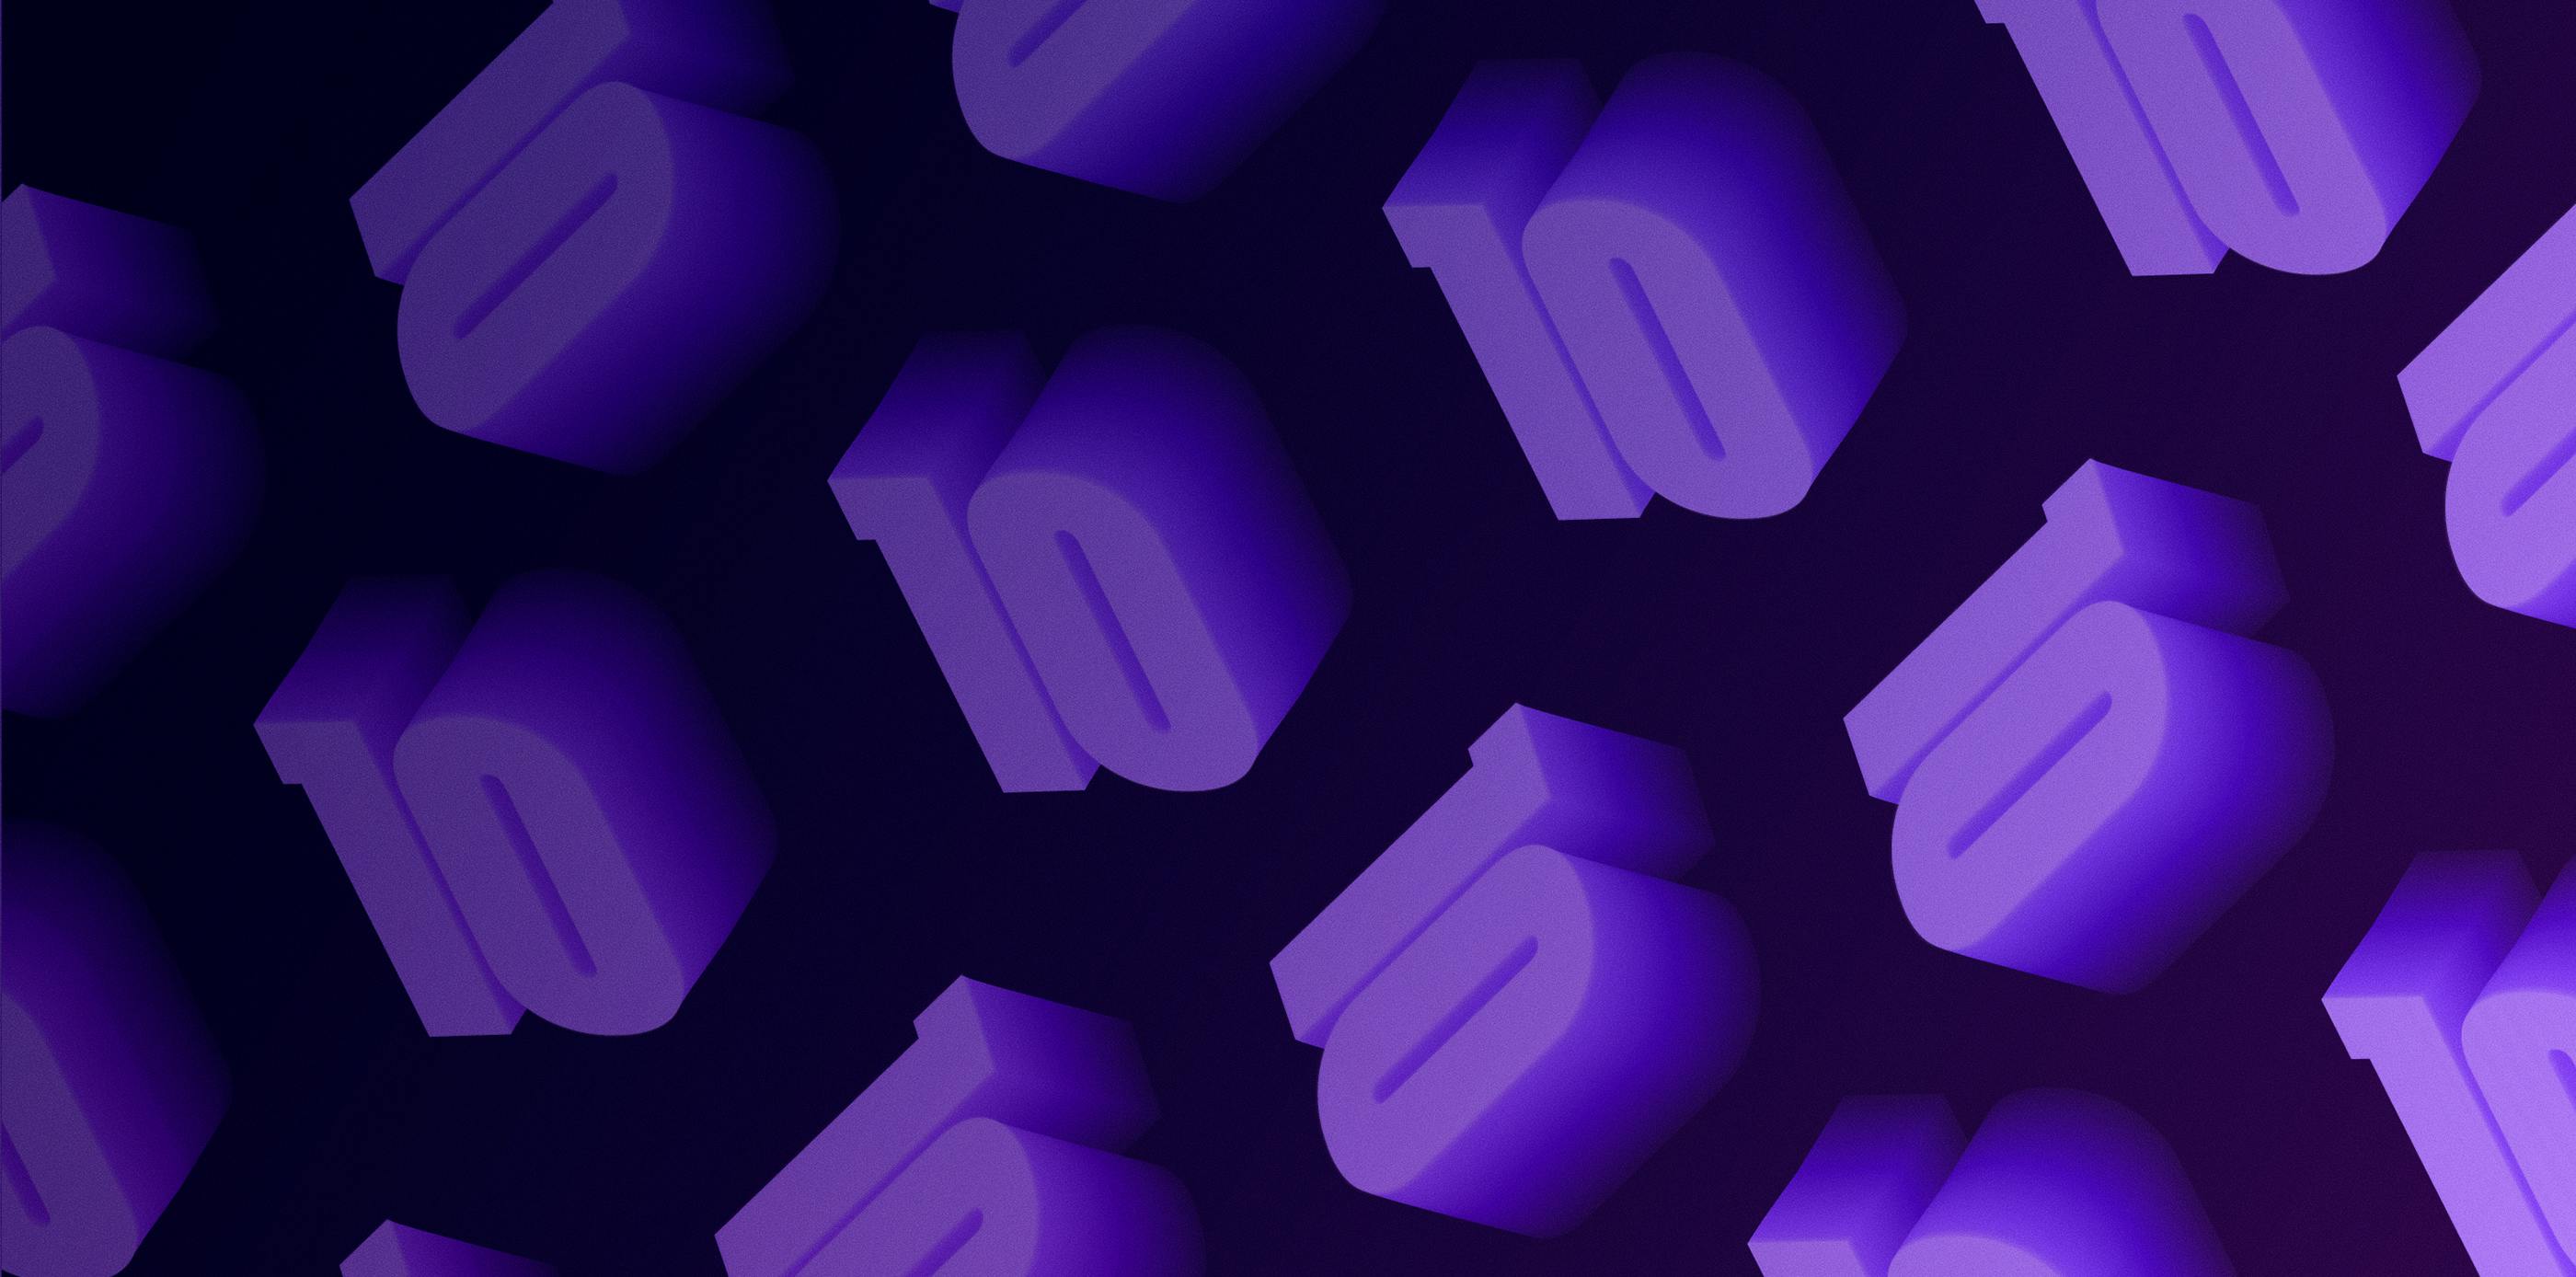 A digital background comprised of repeated 3d illustrations of the number 10, staggered and angled on a dark purple background.